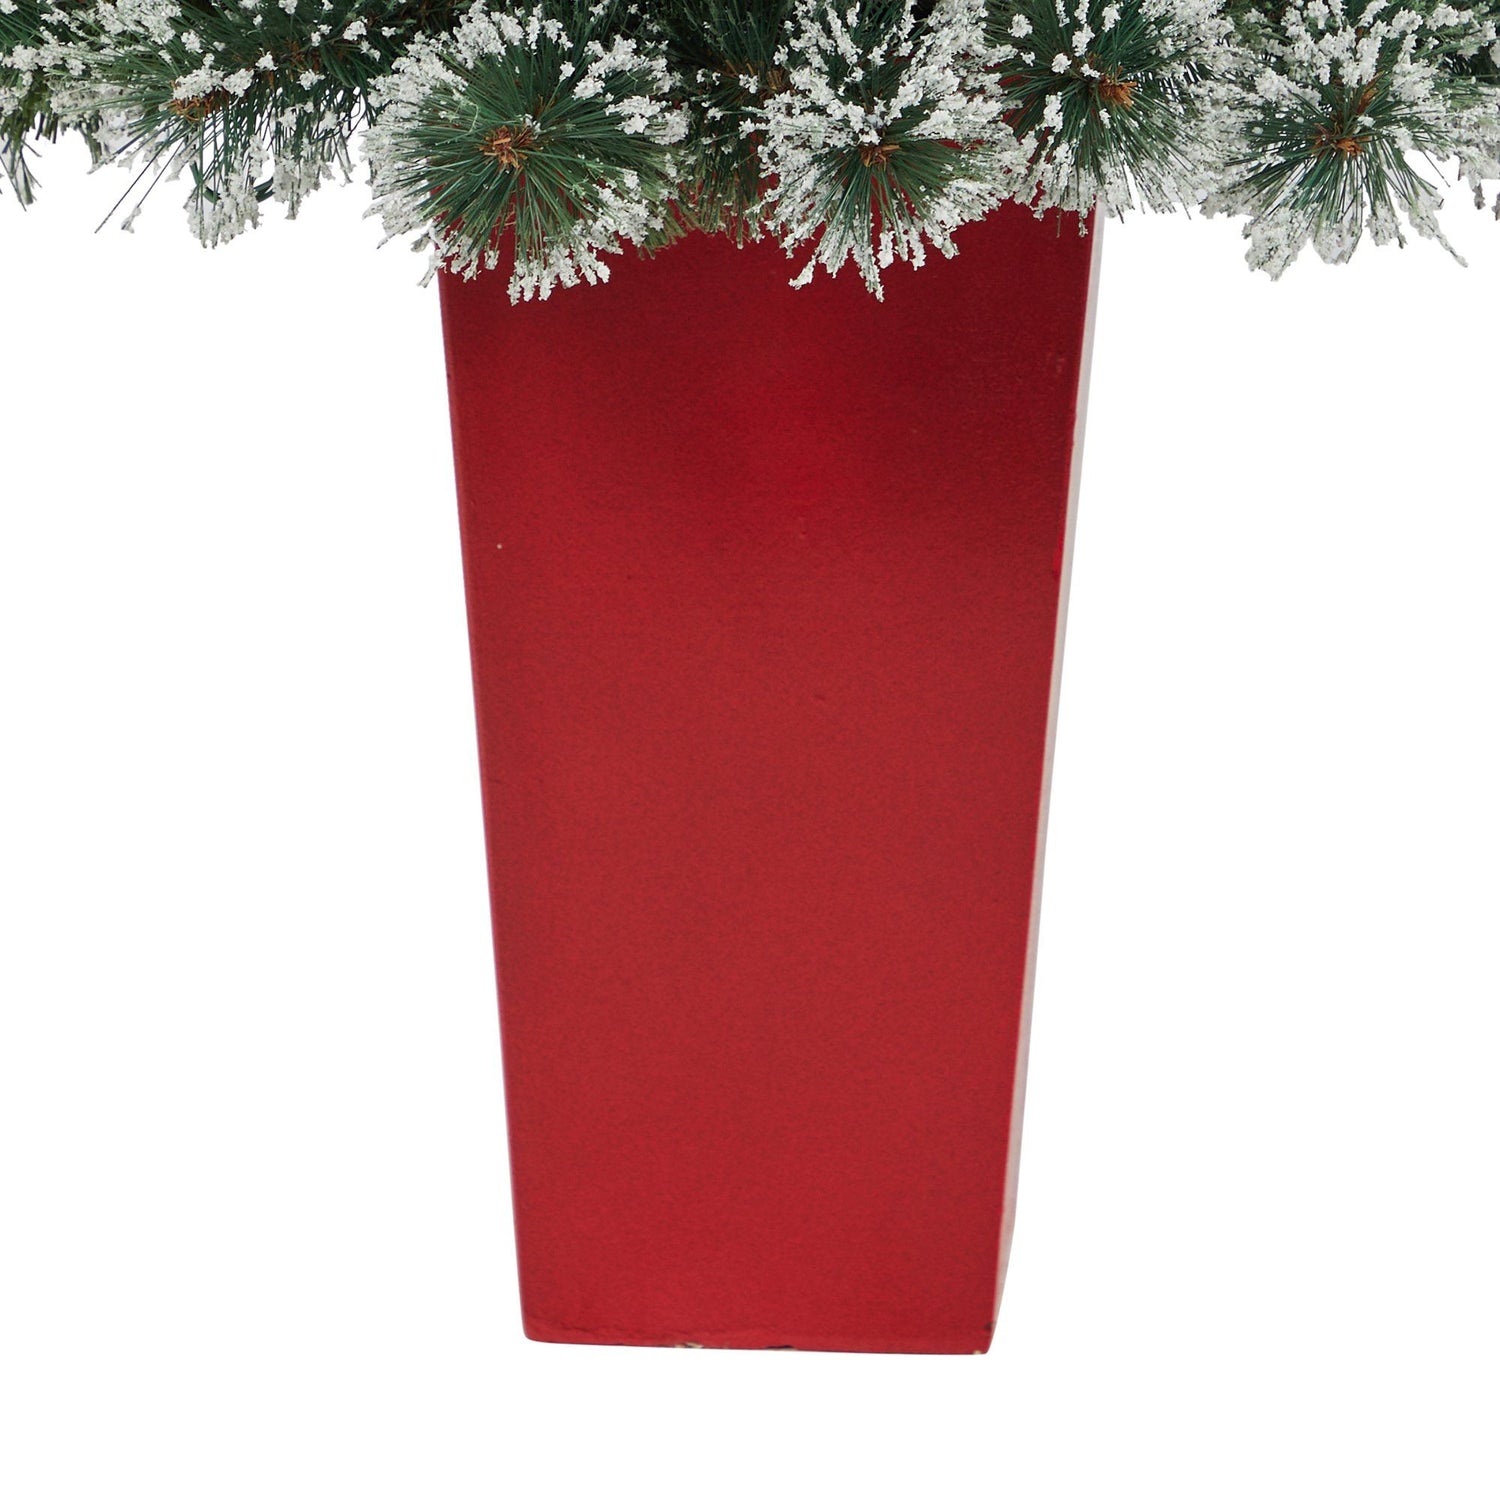 52” Frosted Swiss Pine Artificial Christmas Tree with 100 Clear LED Lights and Berries in Red Tower Planter